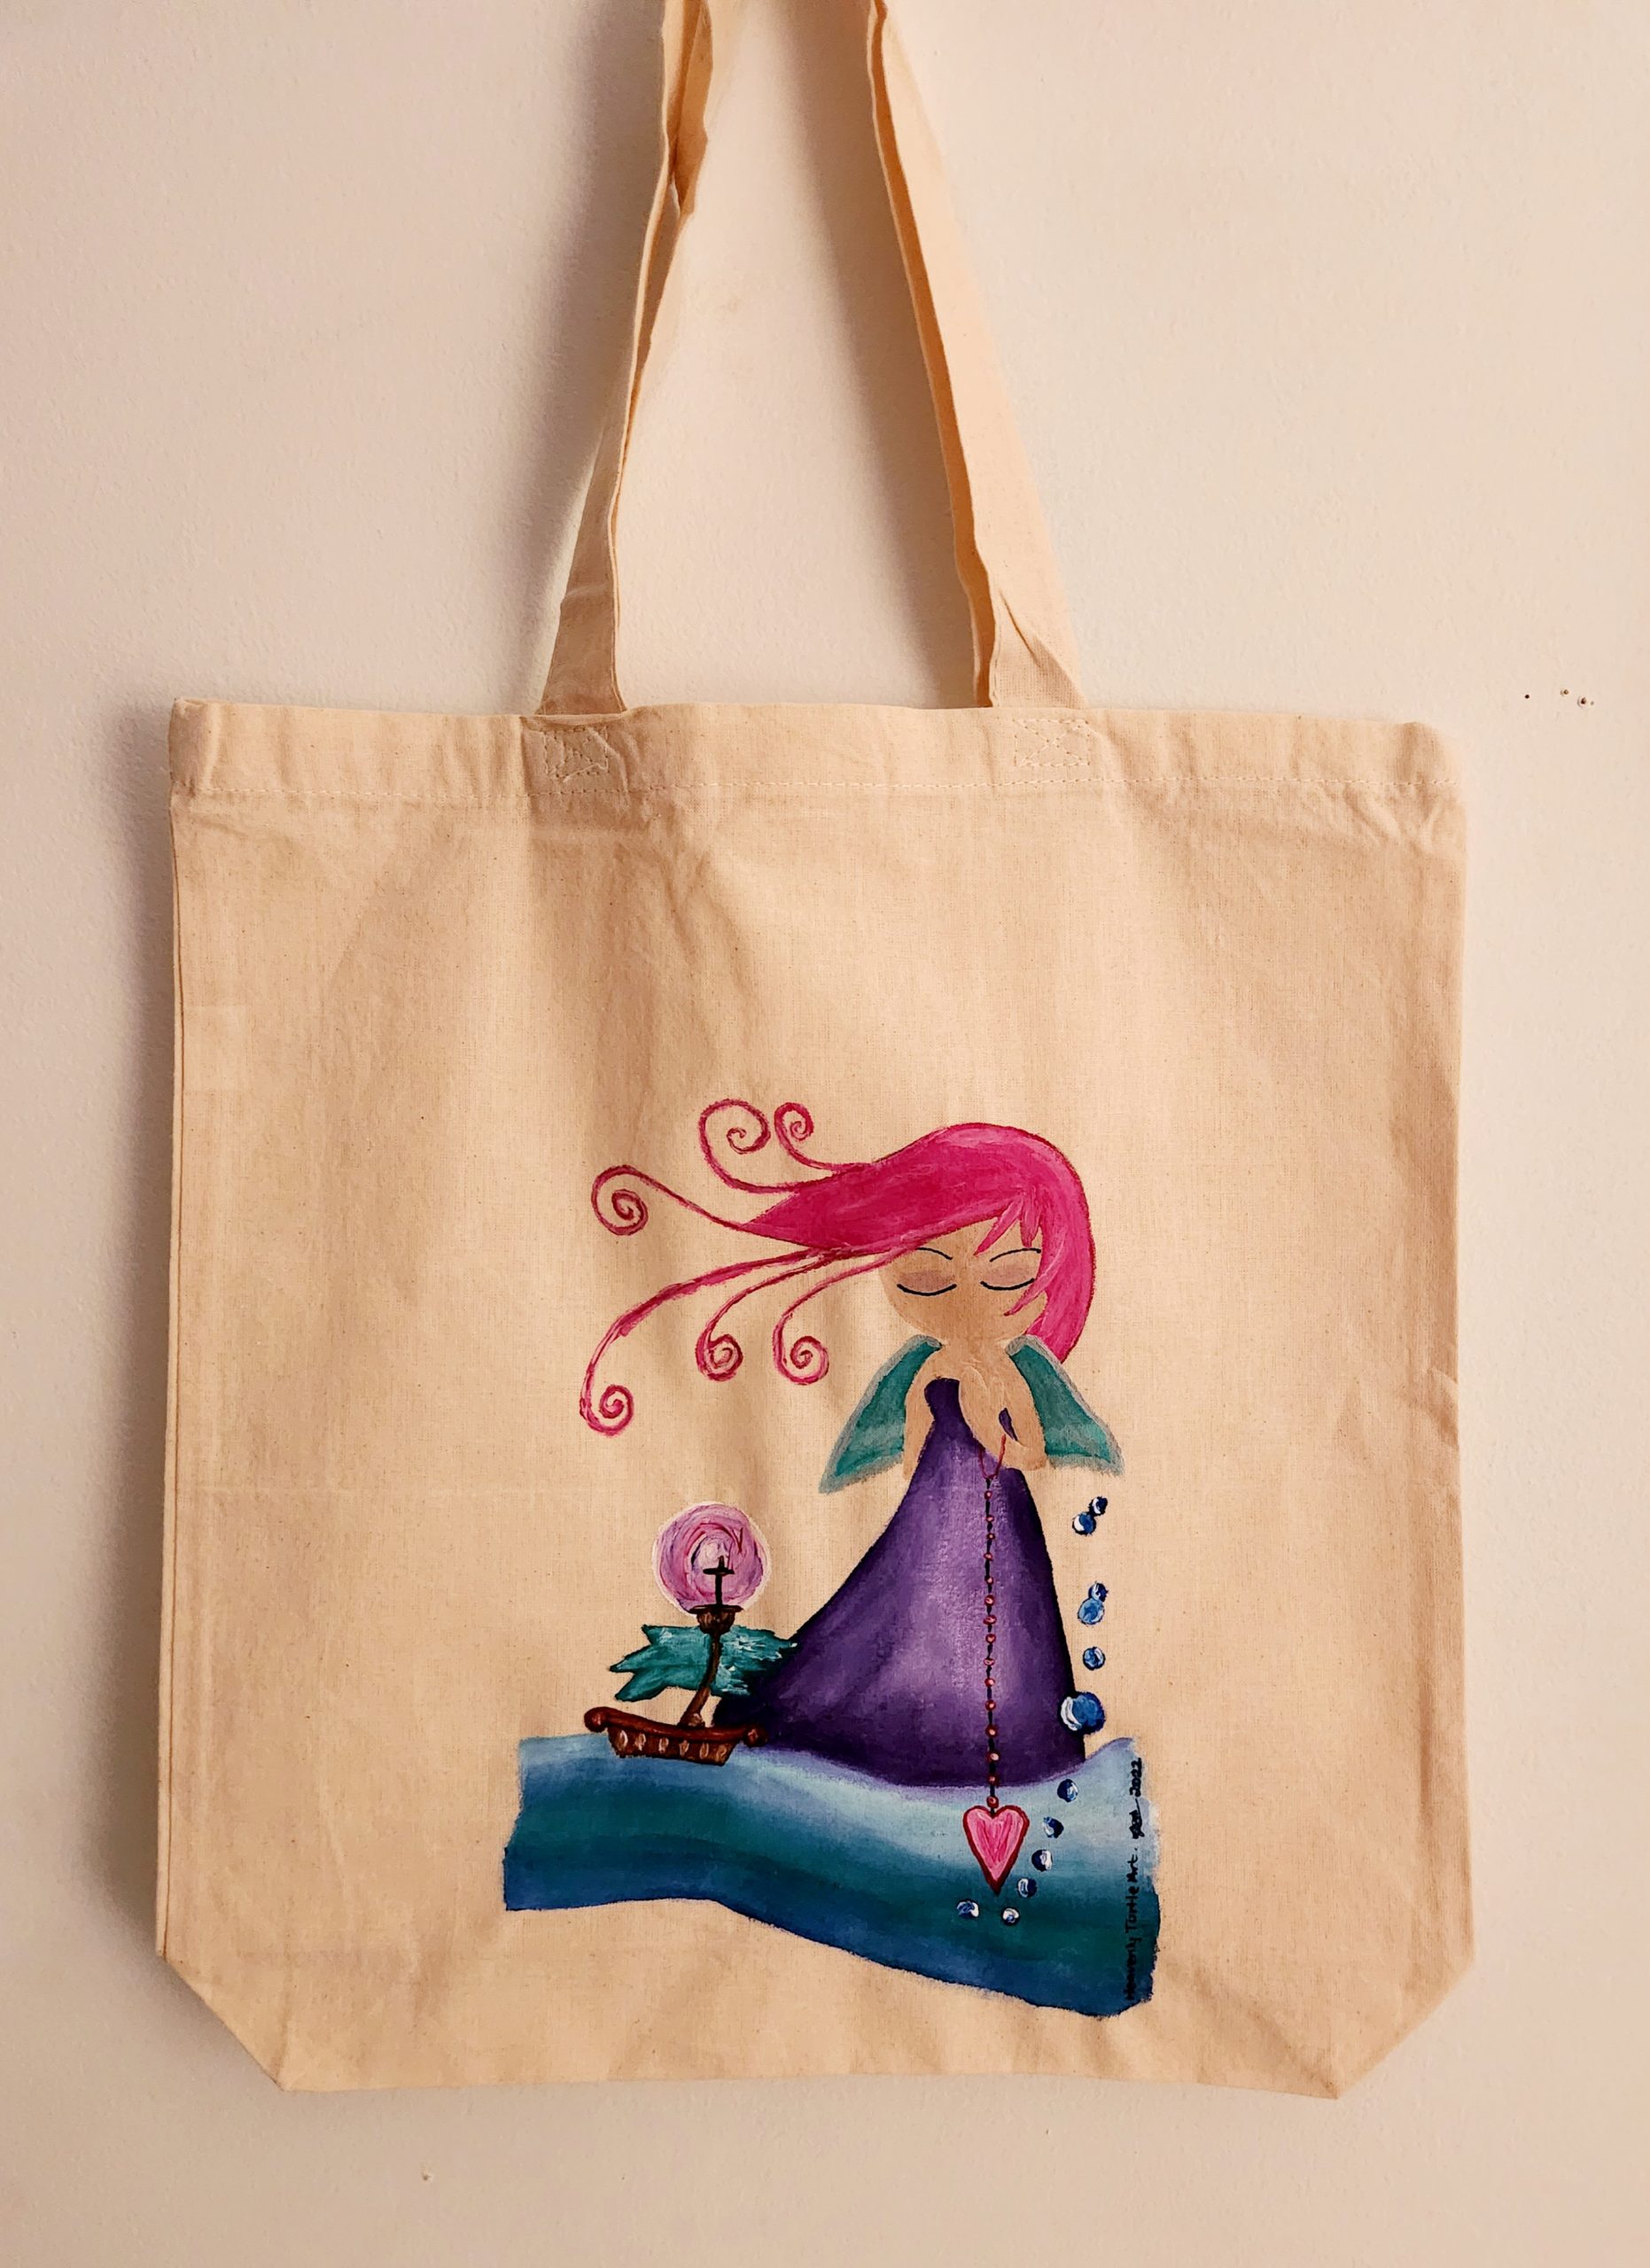 Jo Crossman - Anchored by Love - Original Acrylic Art on Canvas Tote Bag -  St. Lucie Cultural Alliance